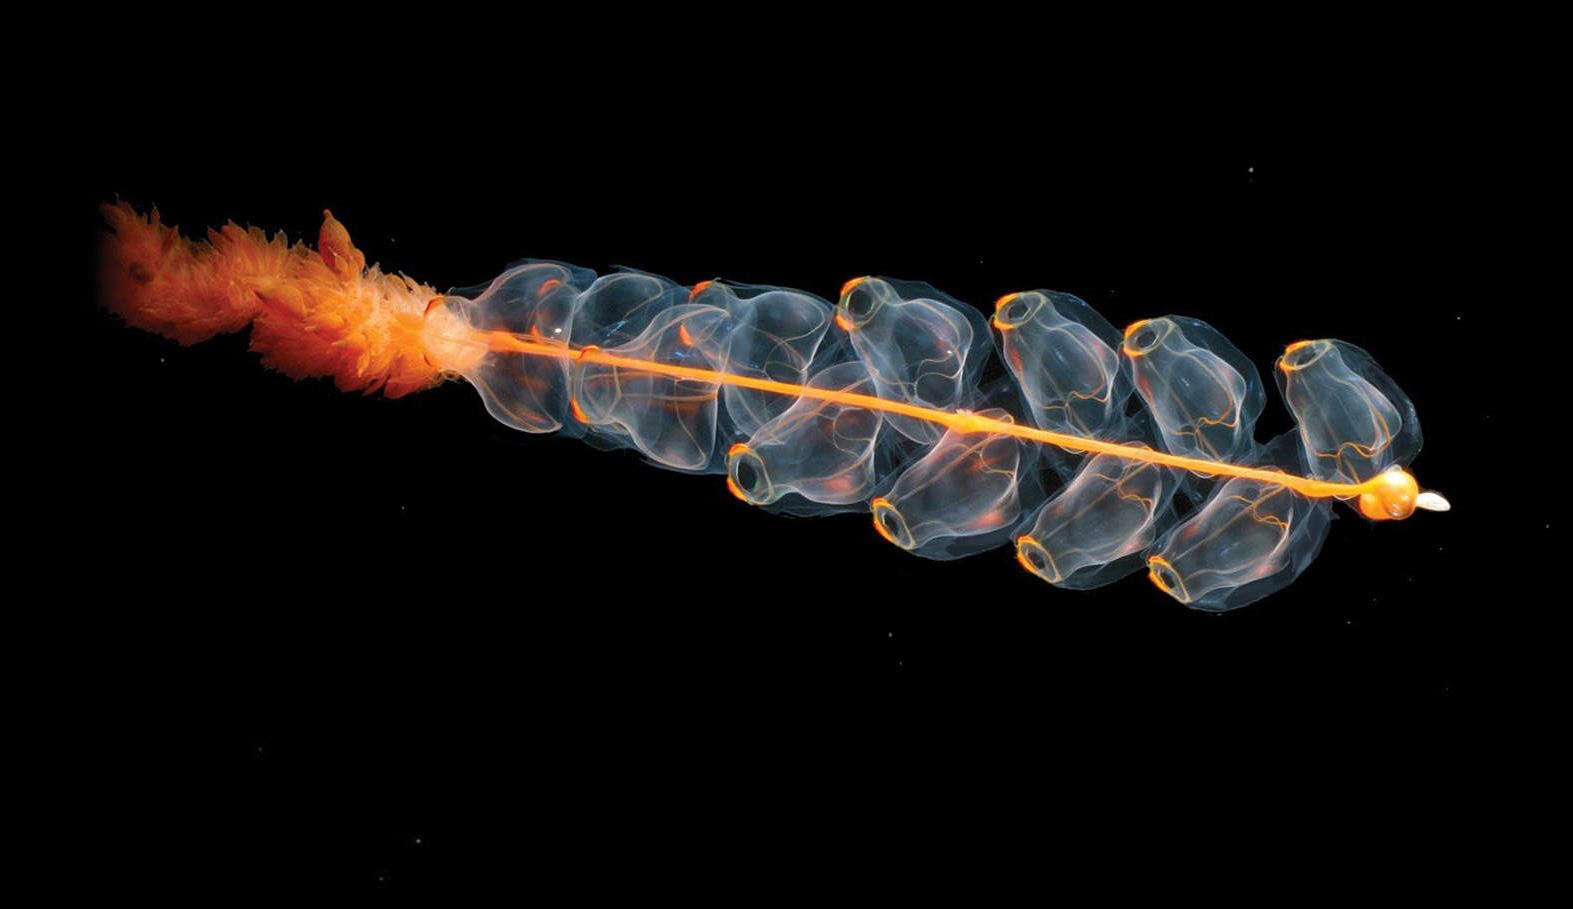 A translucent sea creature, showcasing the complex beauty of life on Earth, with a chain of bead-like structures against a black background.